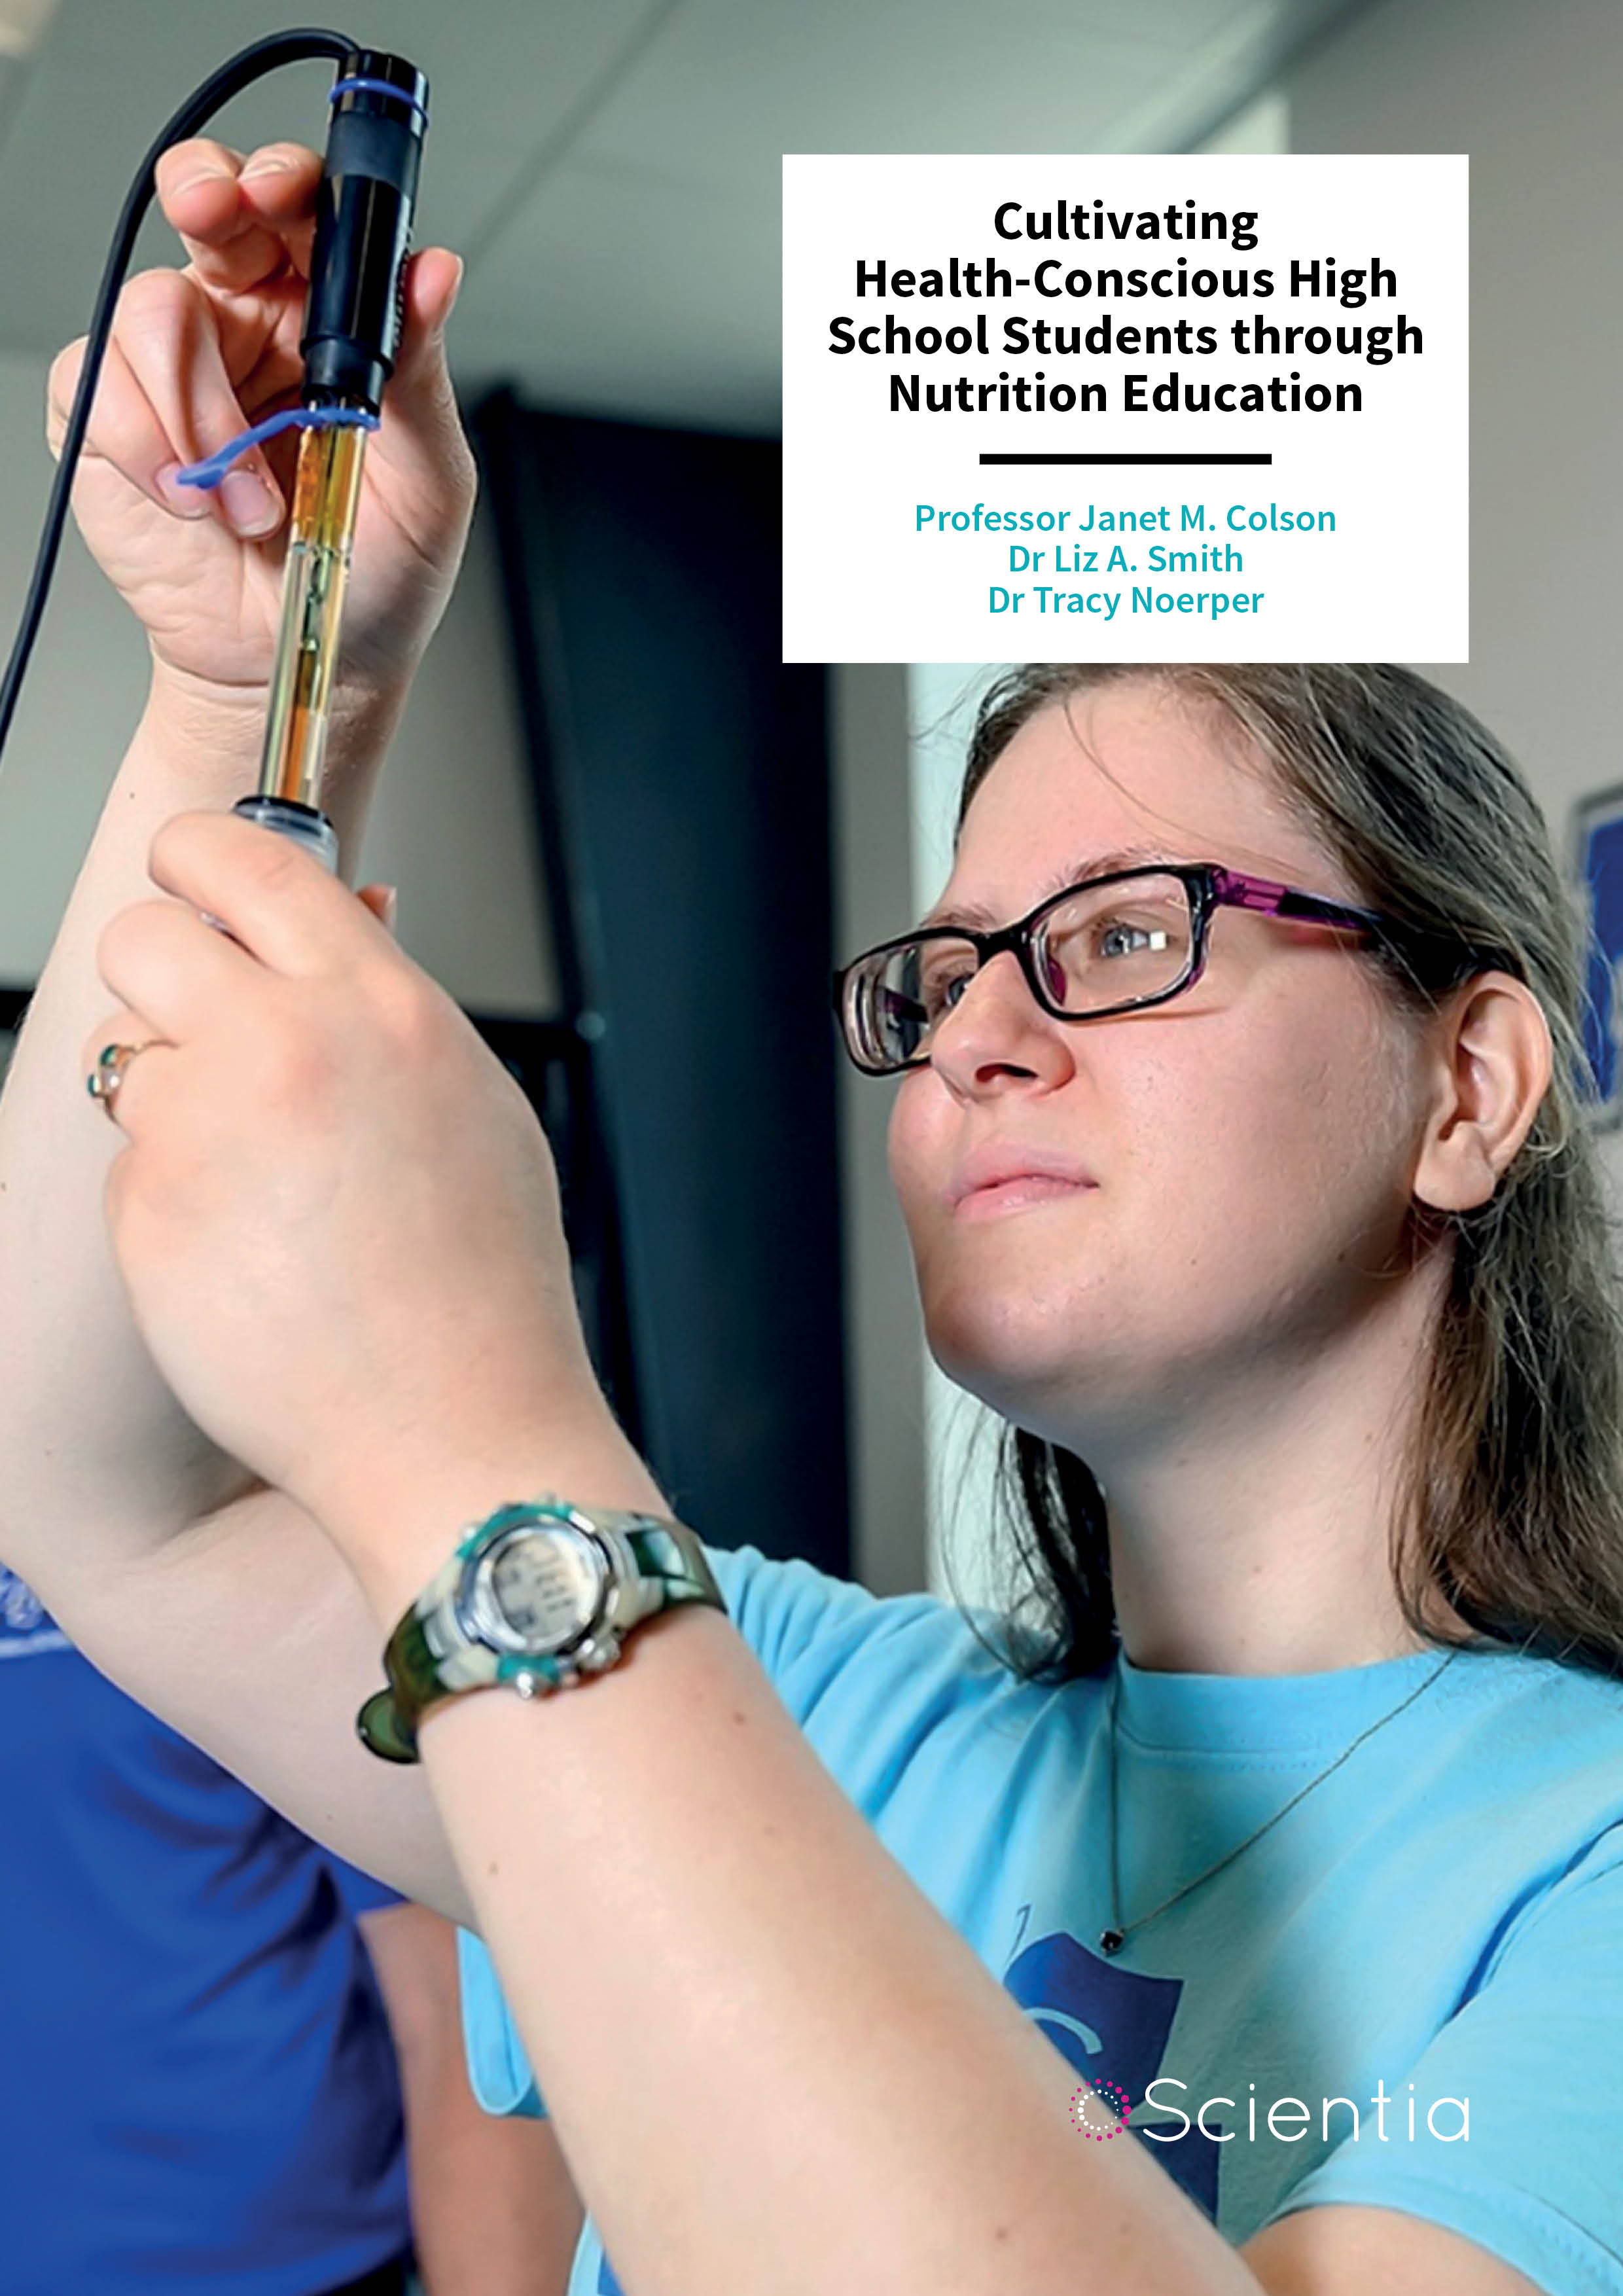 Cultivating Health-Conscious High School Students through Nutrition Education